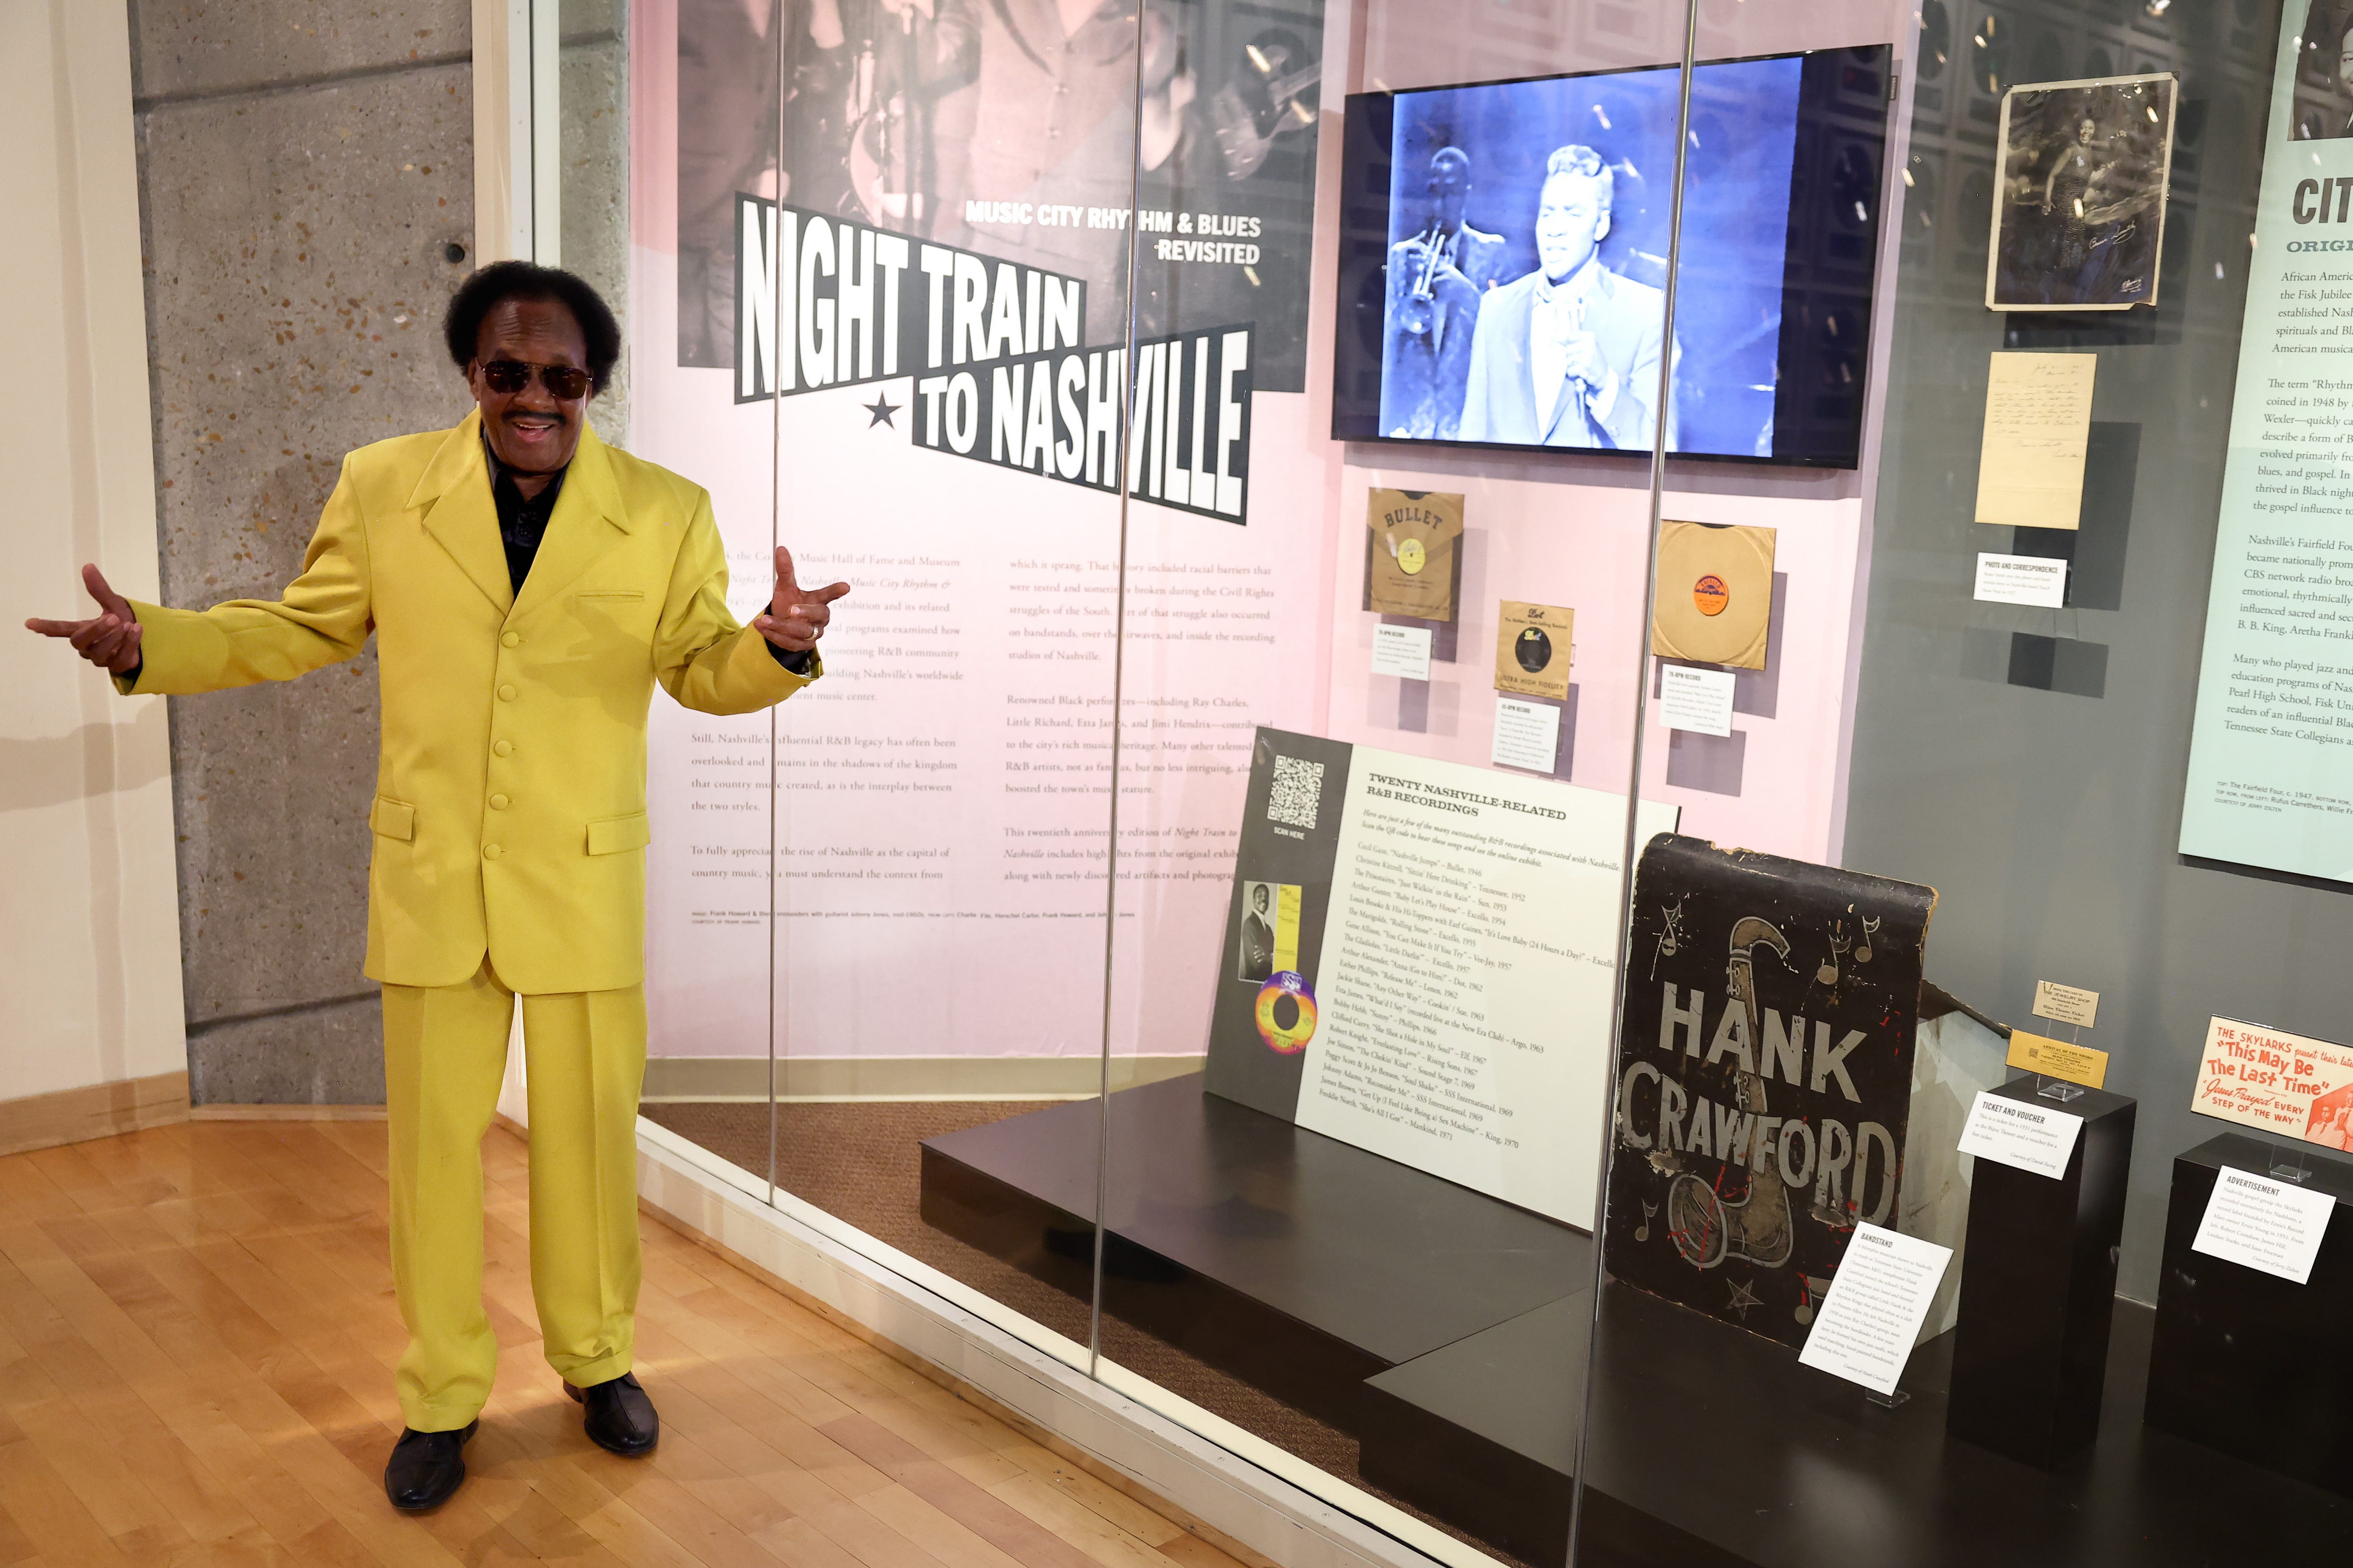 Nashville soul legends celebrate legacies at Country Music Hall of Fame and Museum